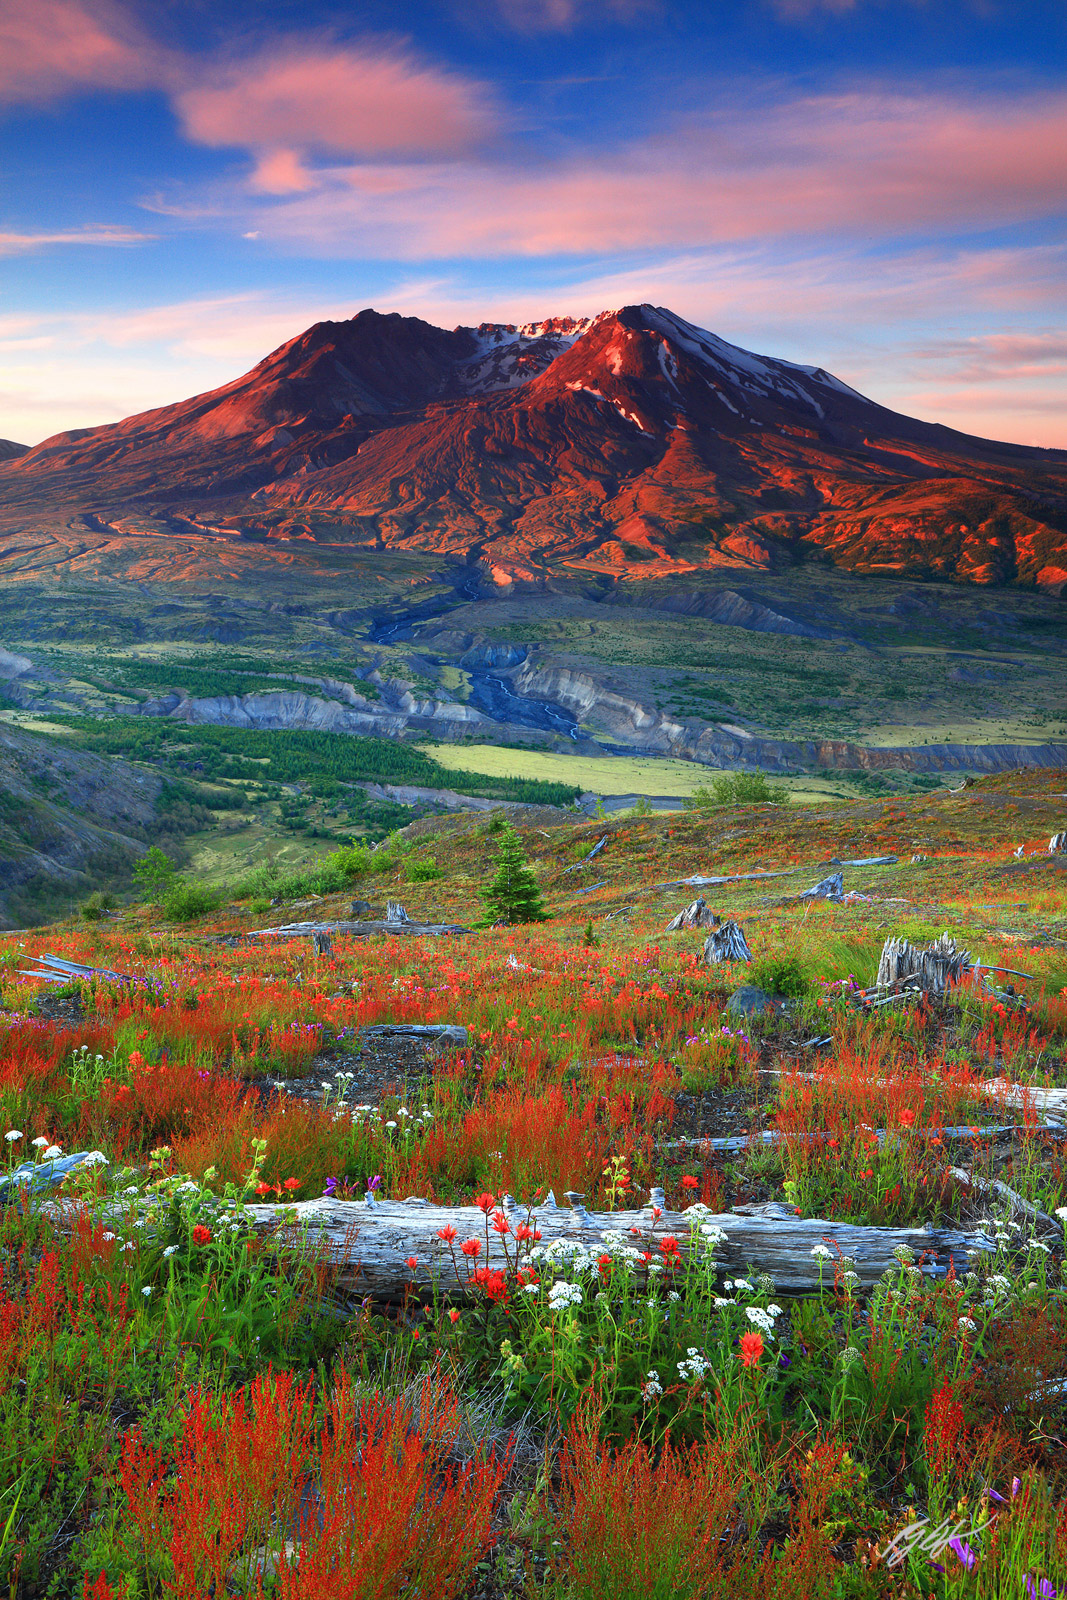 Sunrise with Wildflowers and Mt St Helens from Johnston Ridge in Mt St Helens National Volcanic Monument in Washington